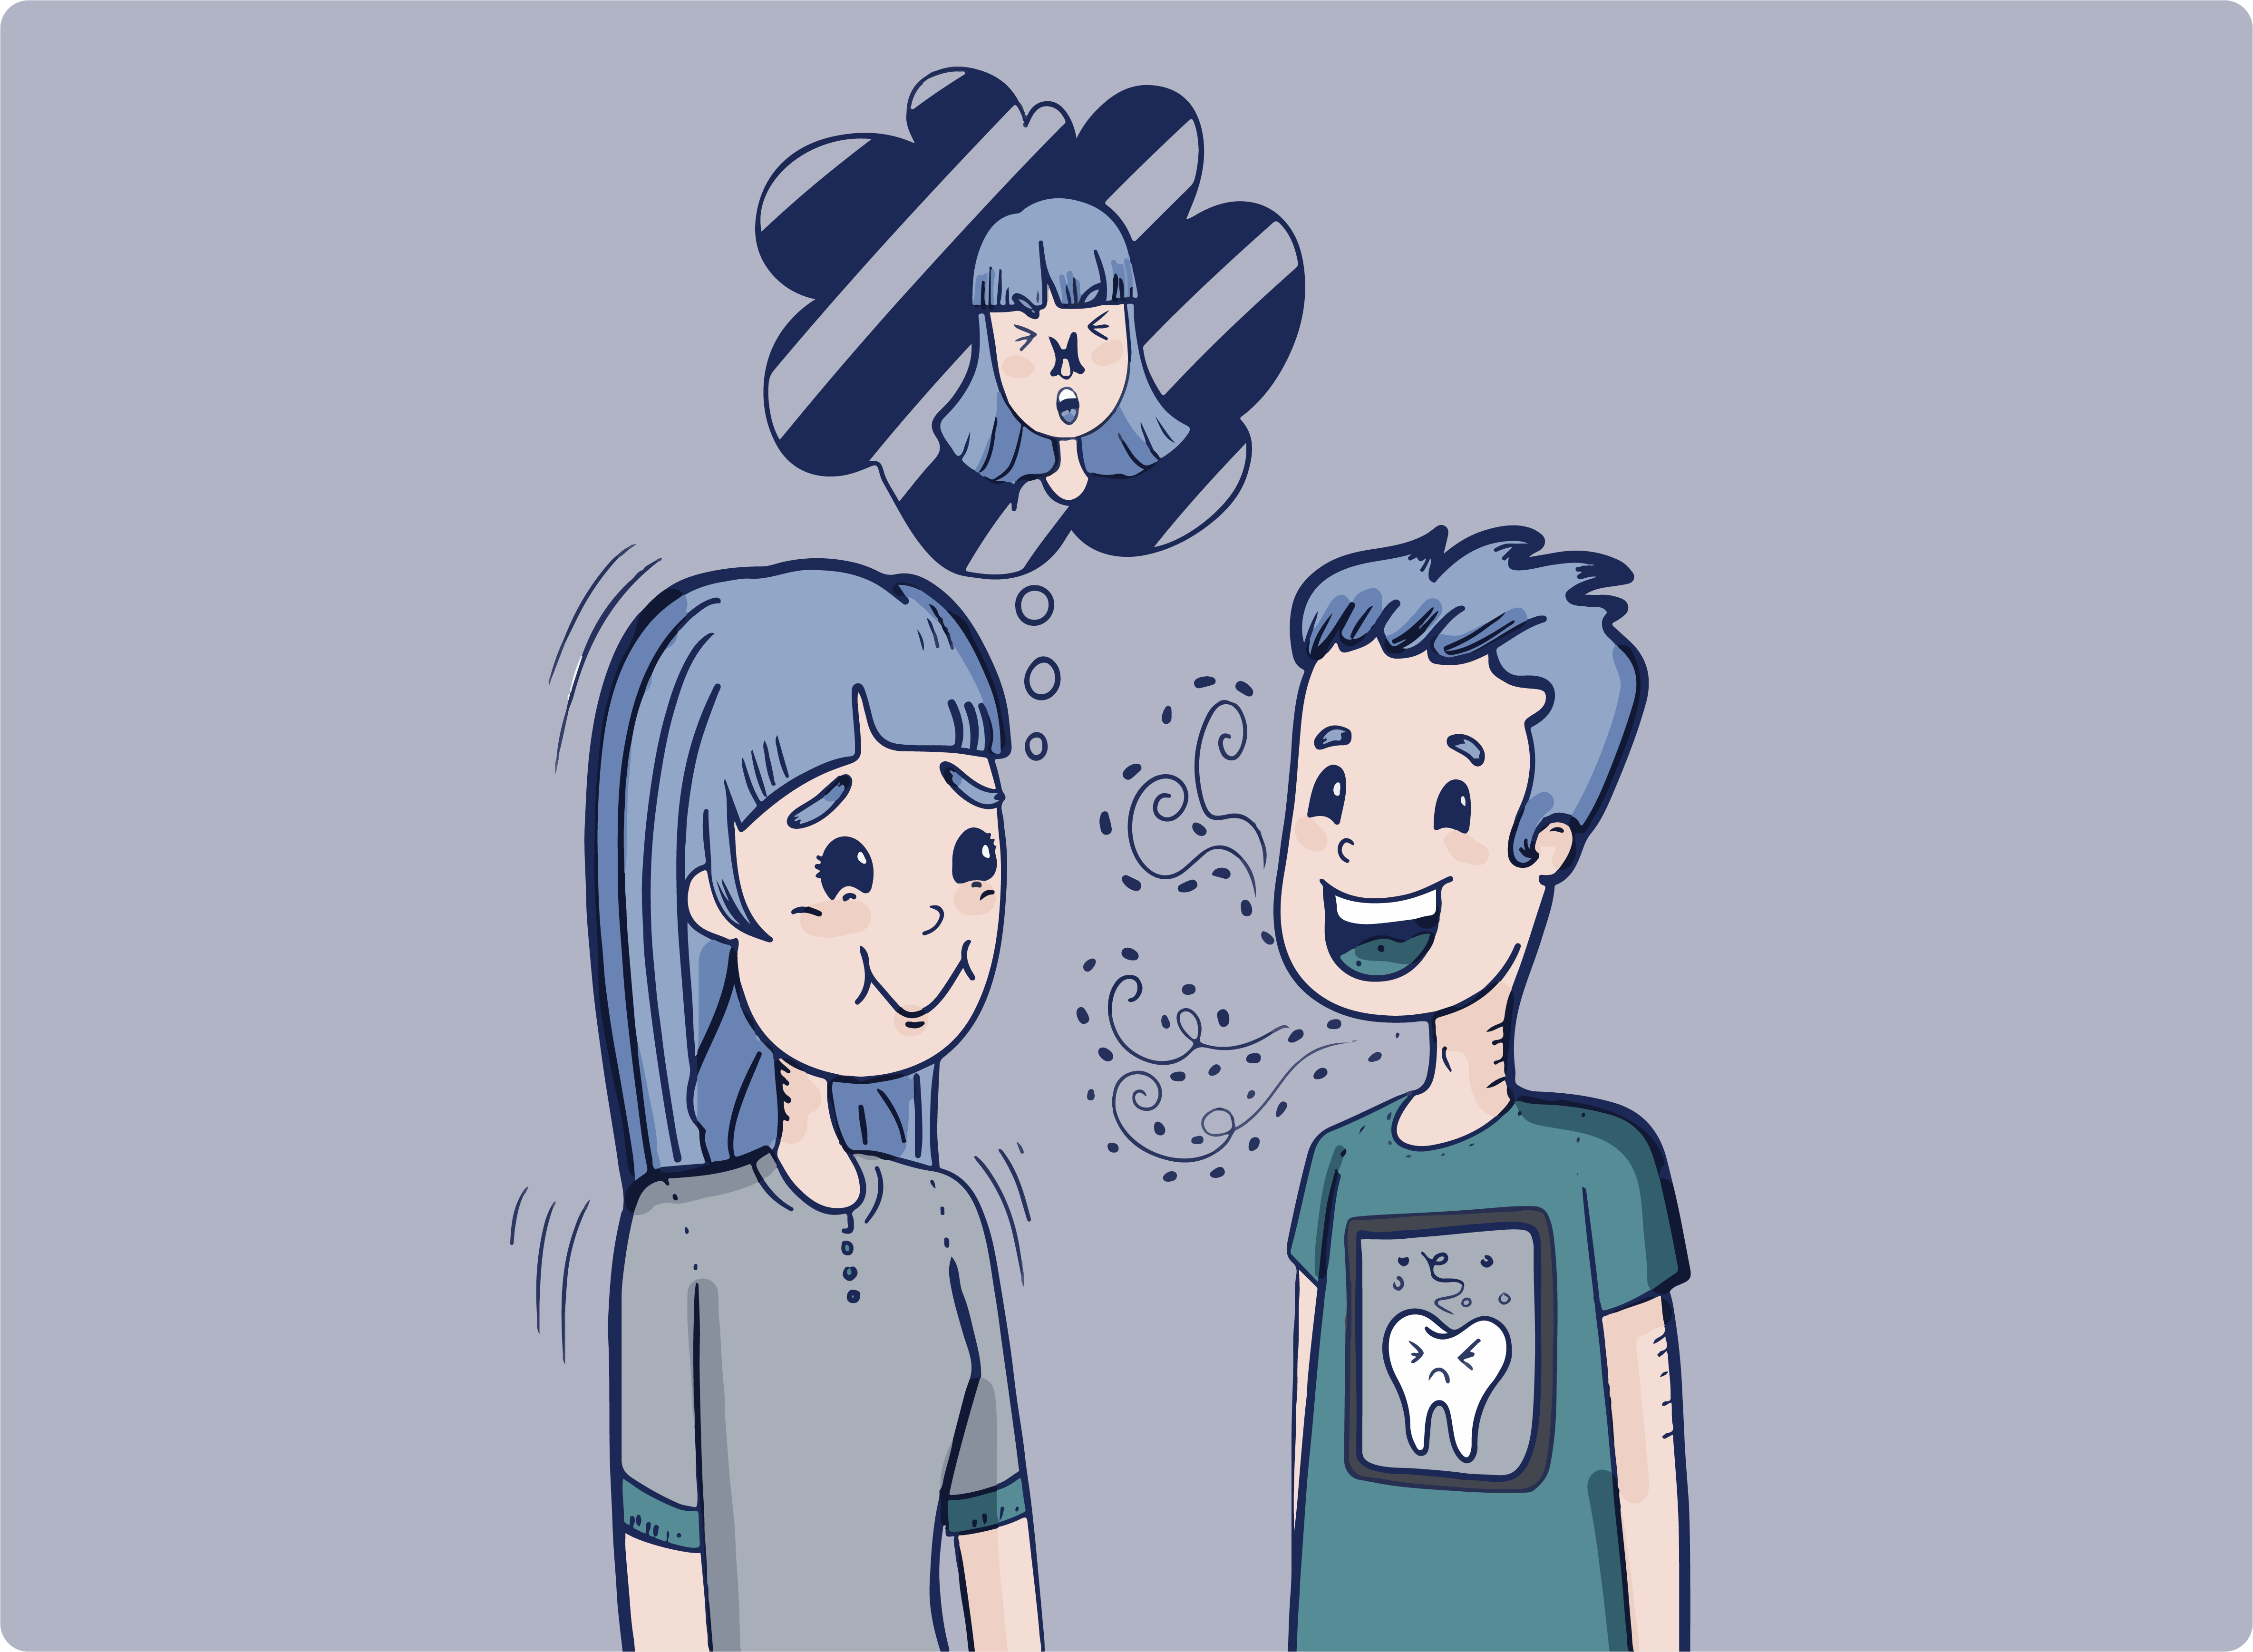 Illustration showing two people talking. One of them has bad breath.